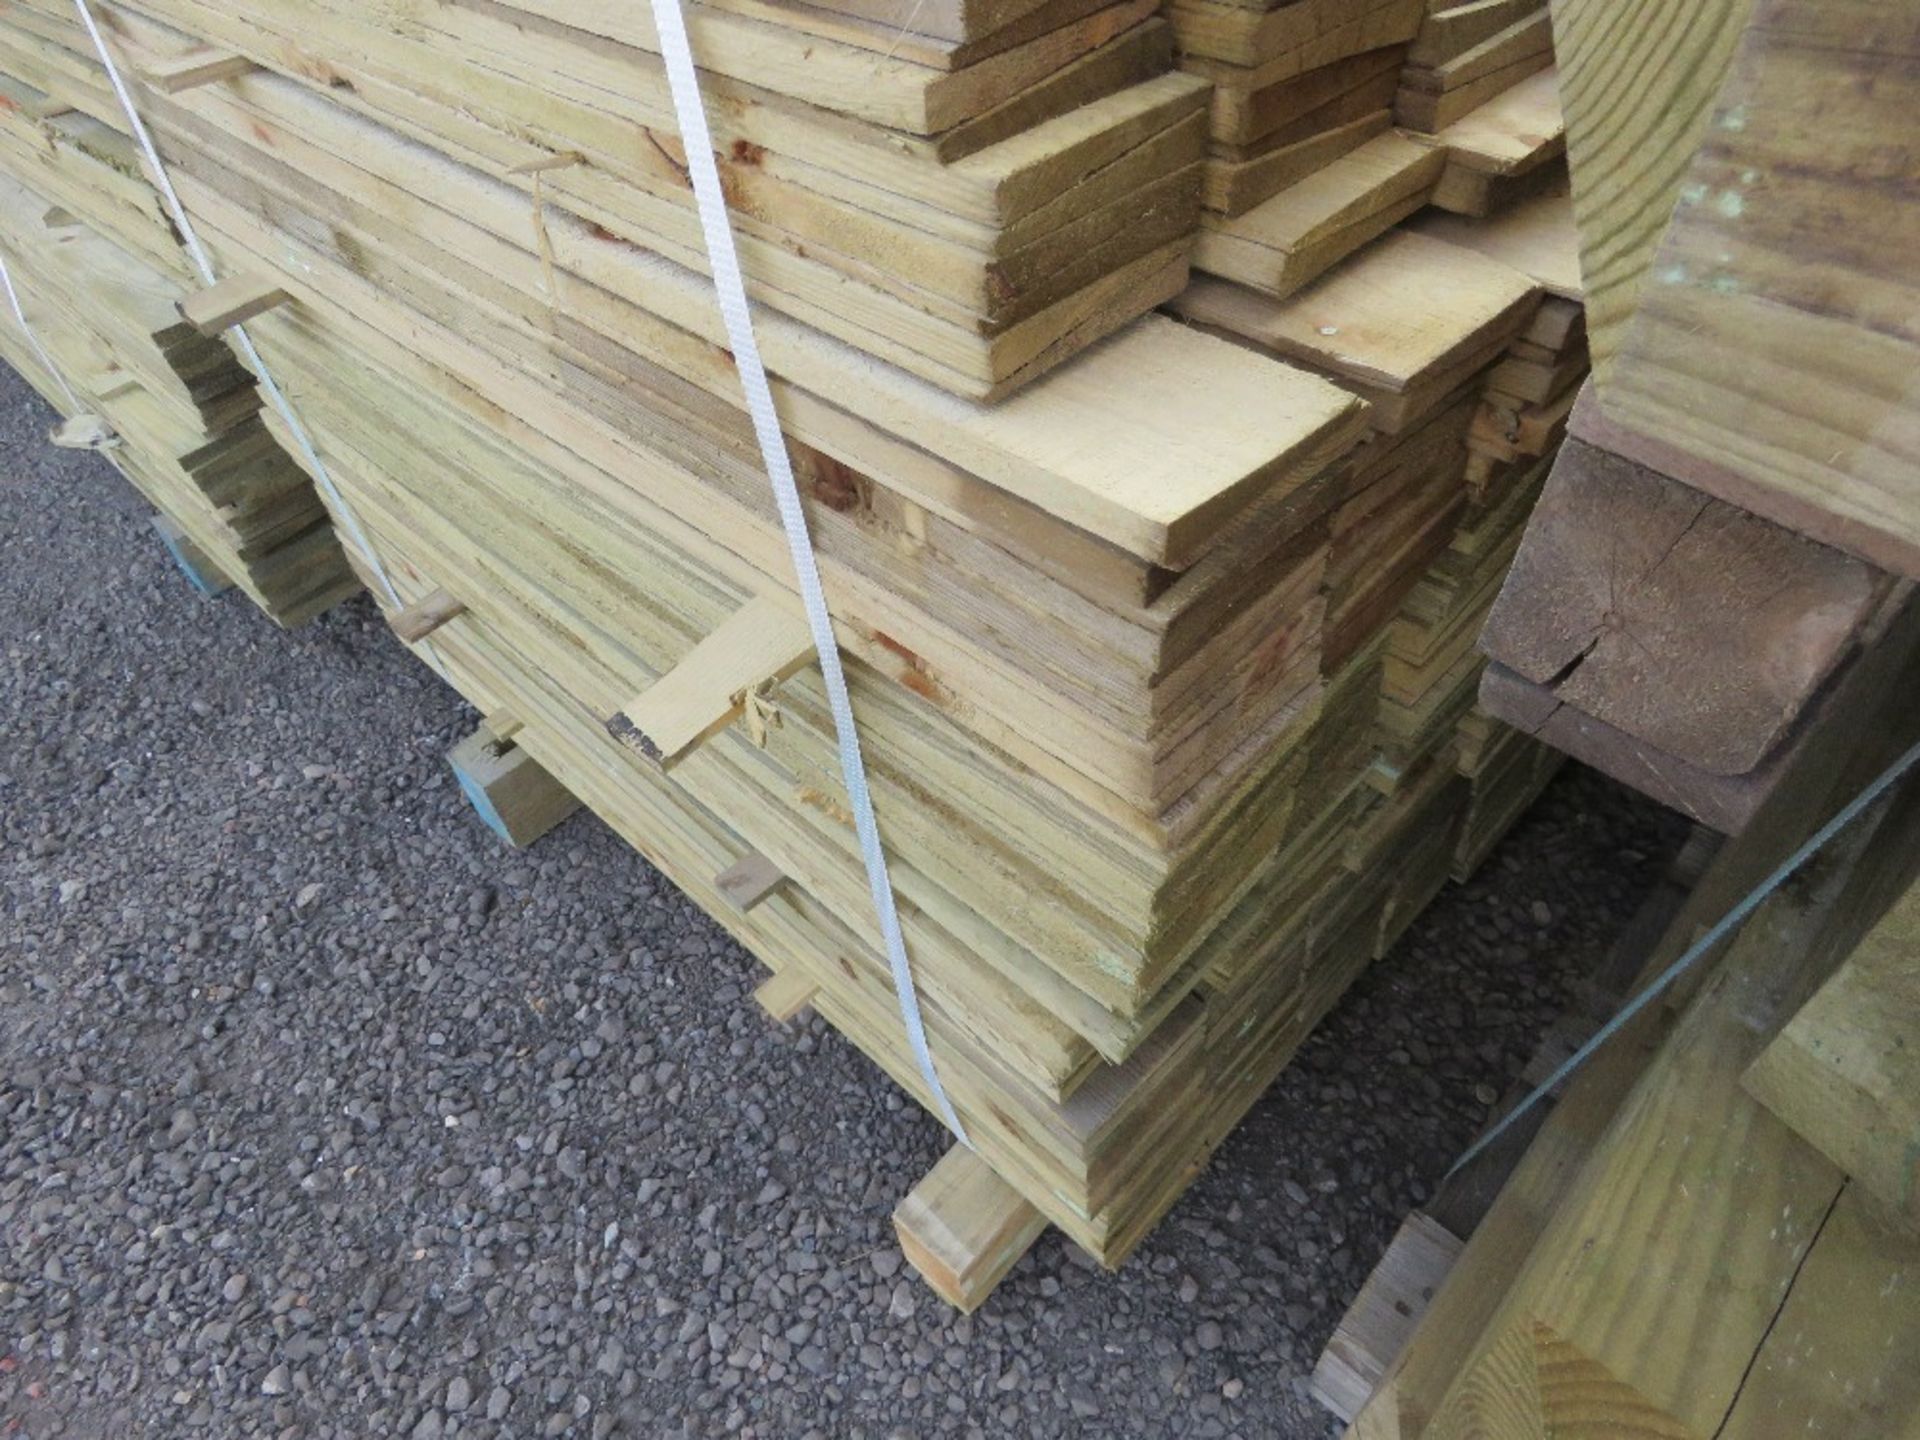 PACK OF PRESSURE TREATED FEATHER EDGE FENCE CLADDING BOARDS. 0.9M LENGTH X 100MM WIDTH APPROX. - Image 2 of 2